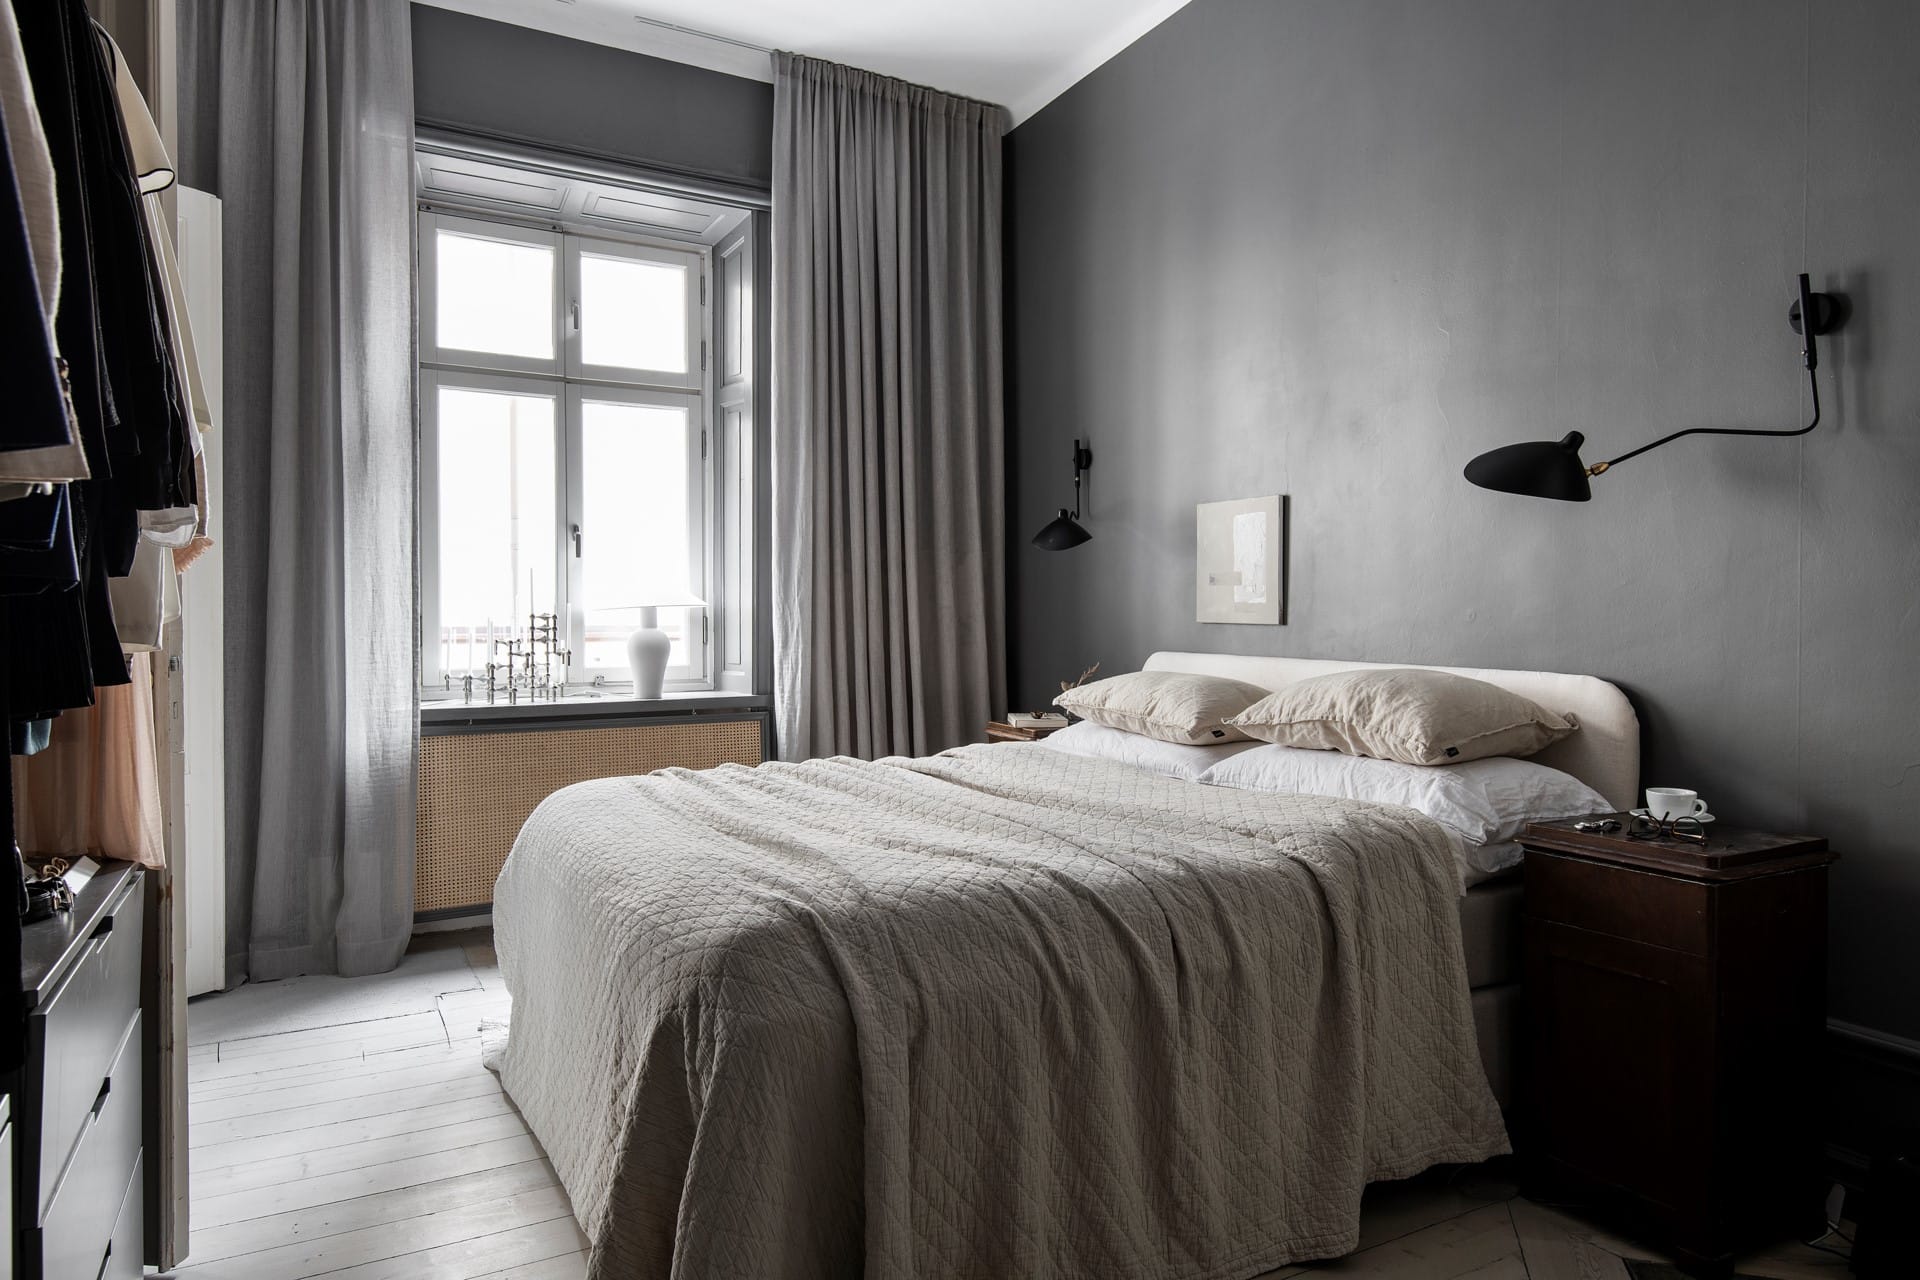 A mid-grey bedroom with warm elements